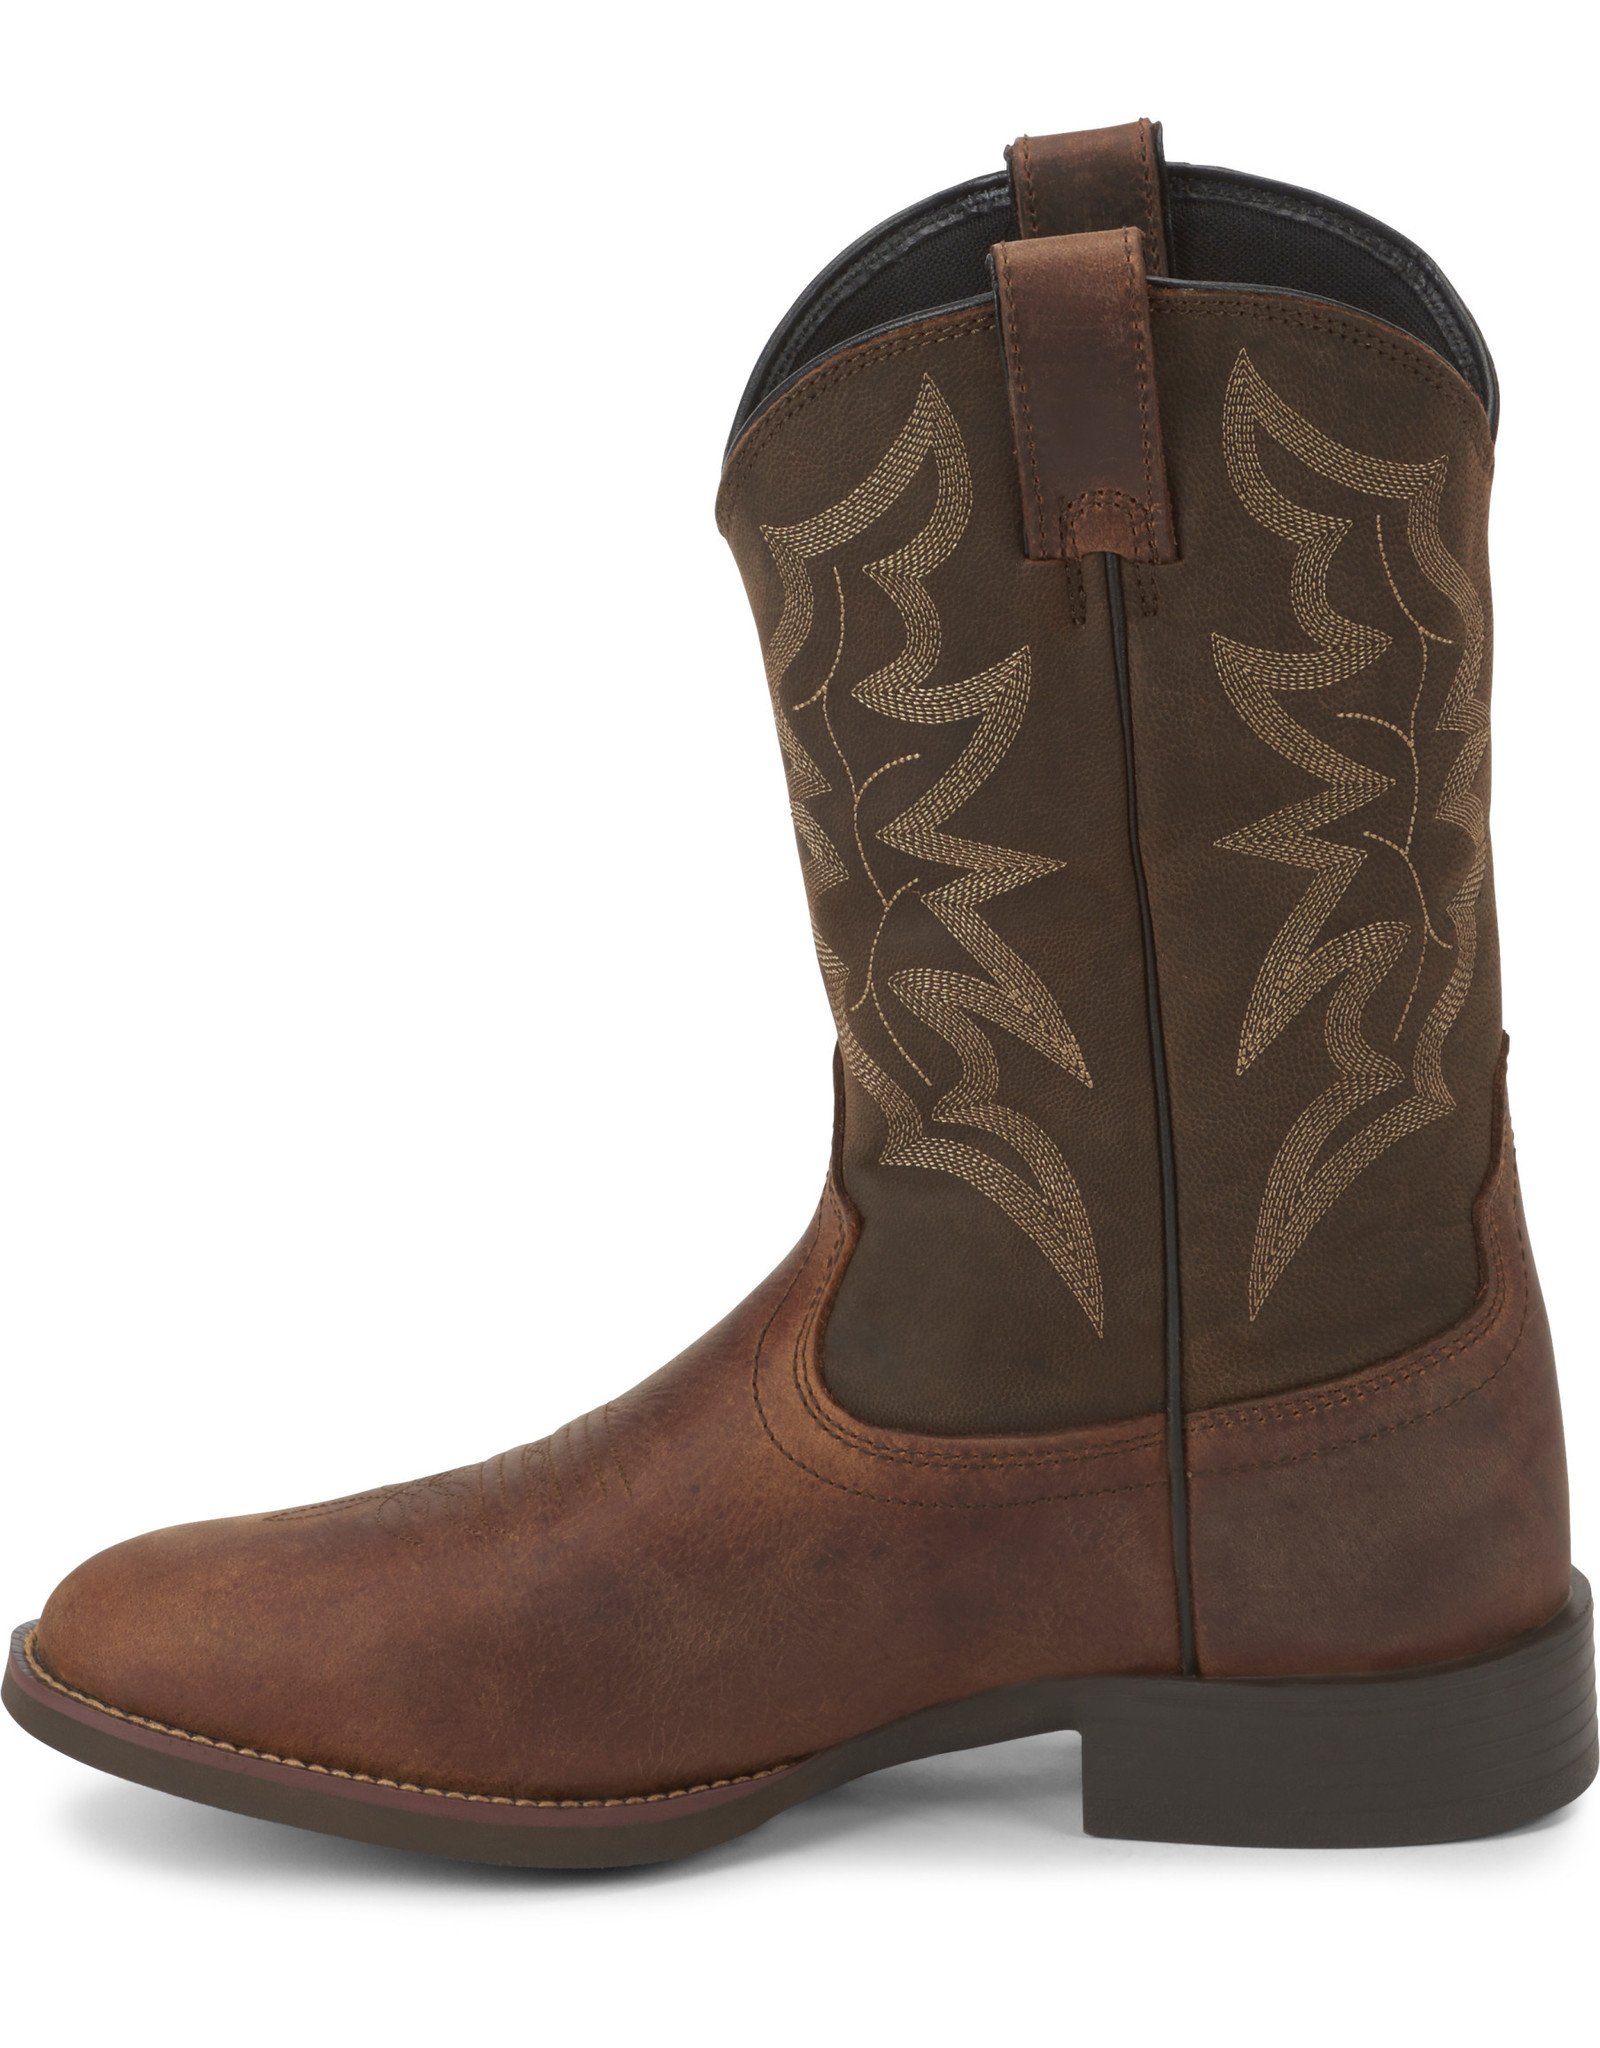 Justin Men's Buster Distressed 7221 Roper Boots